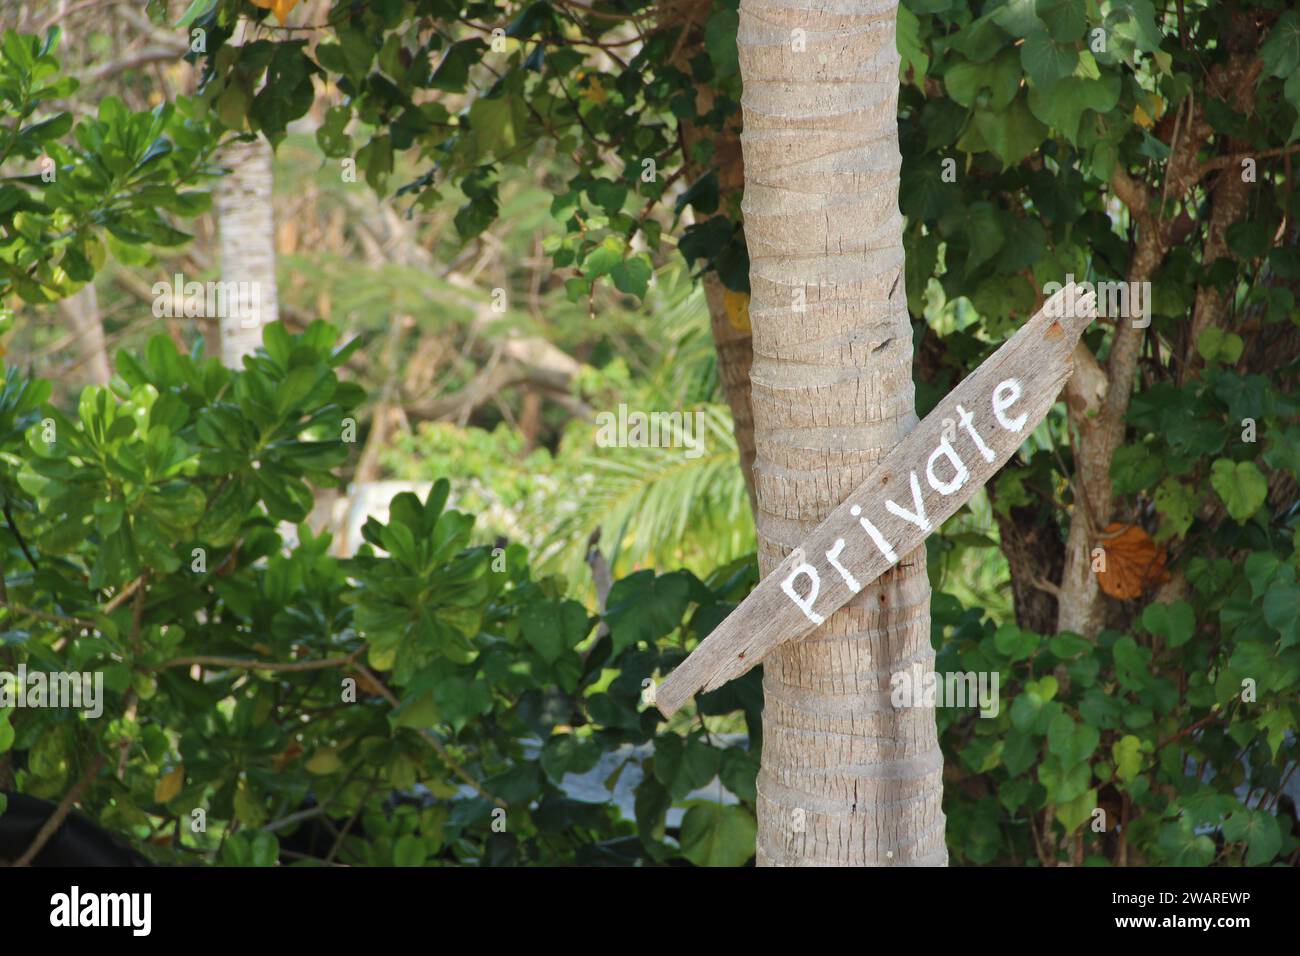 A sign with the label 'Private Land' is displayed on the trunk of a tree, indicating the restriction of access to the area Stock Photo